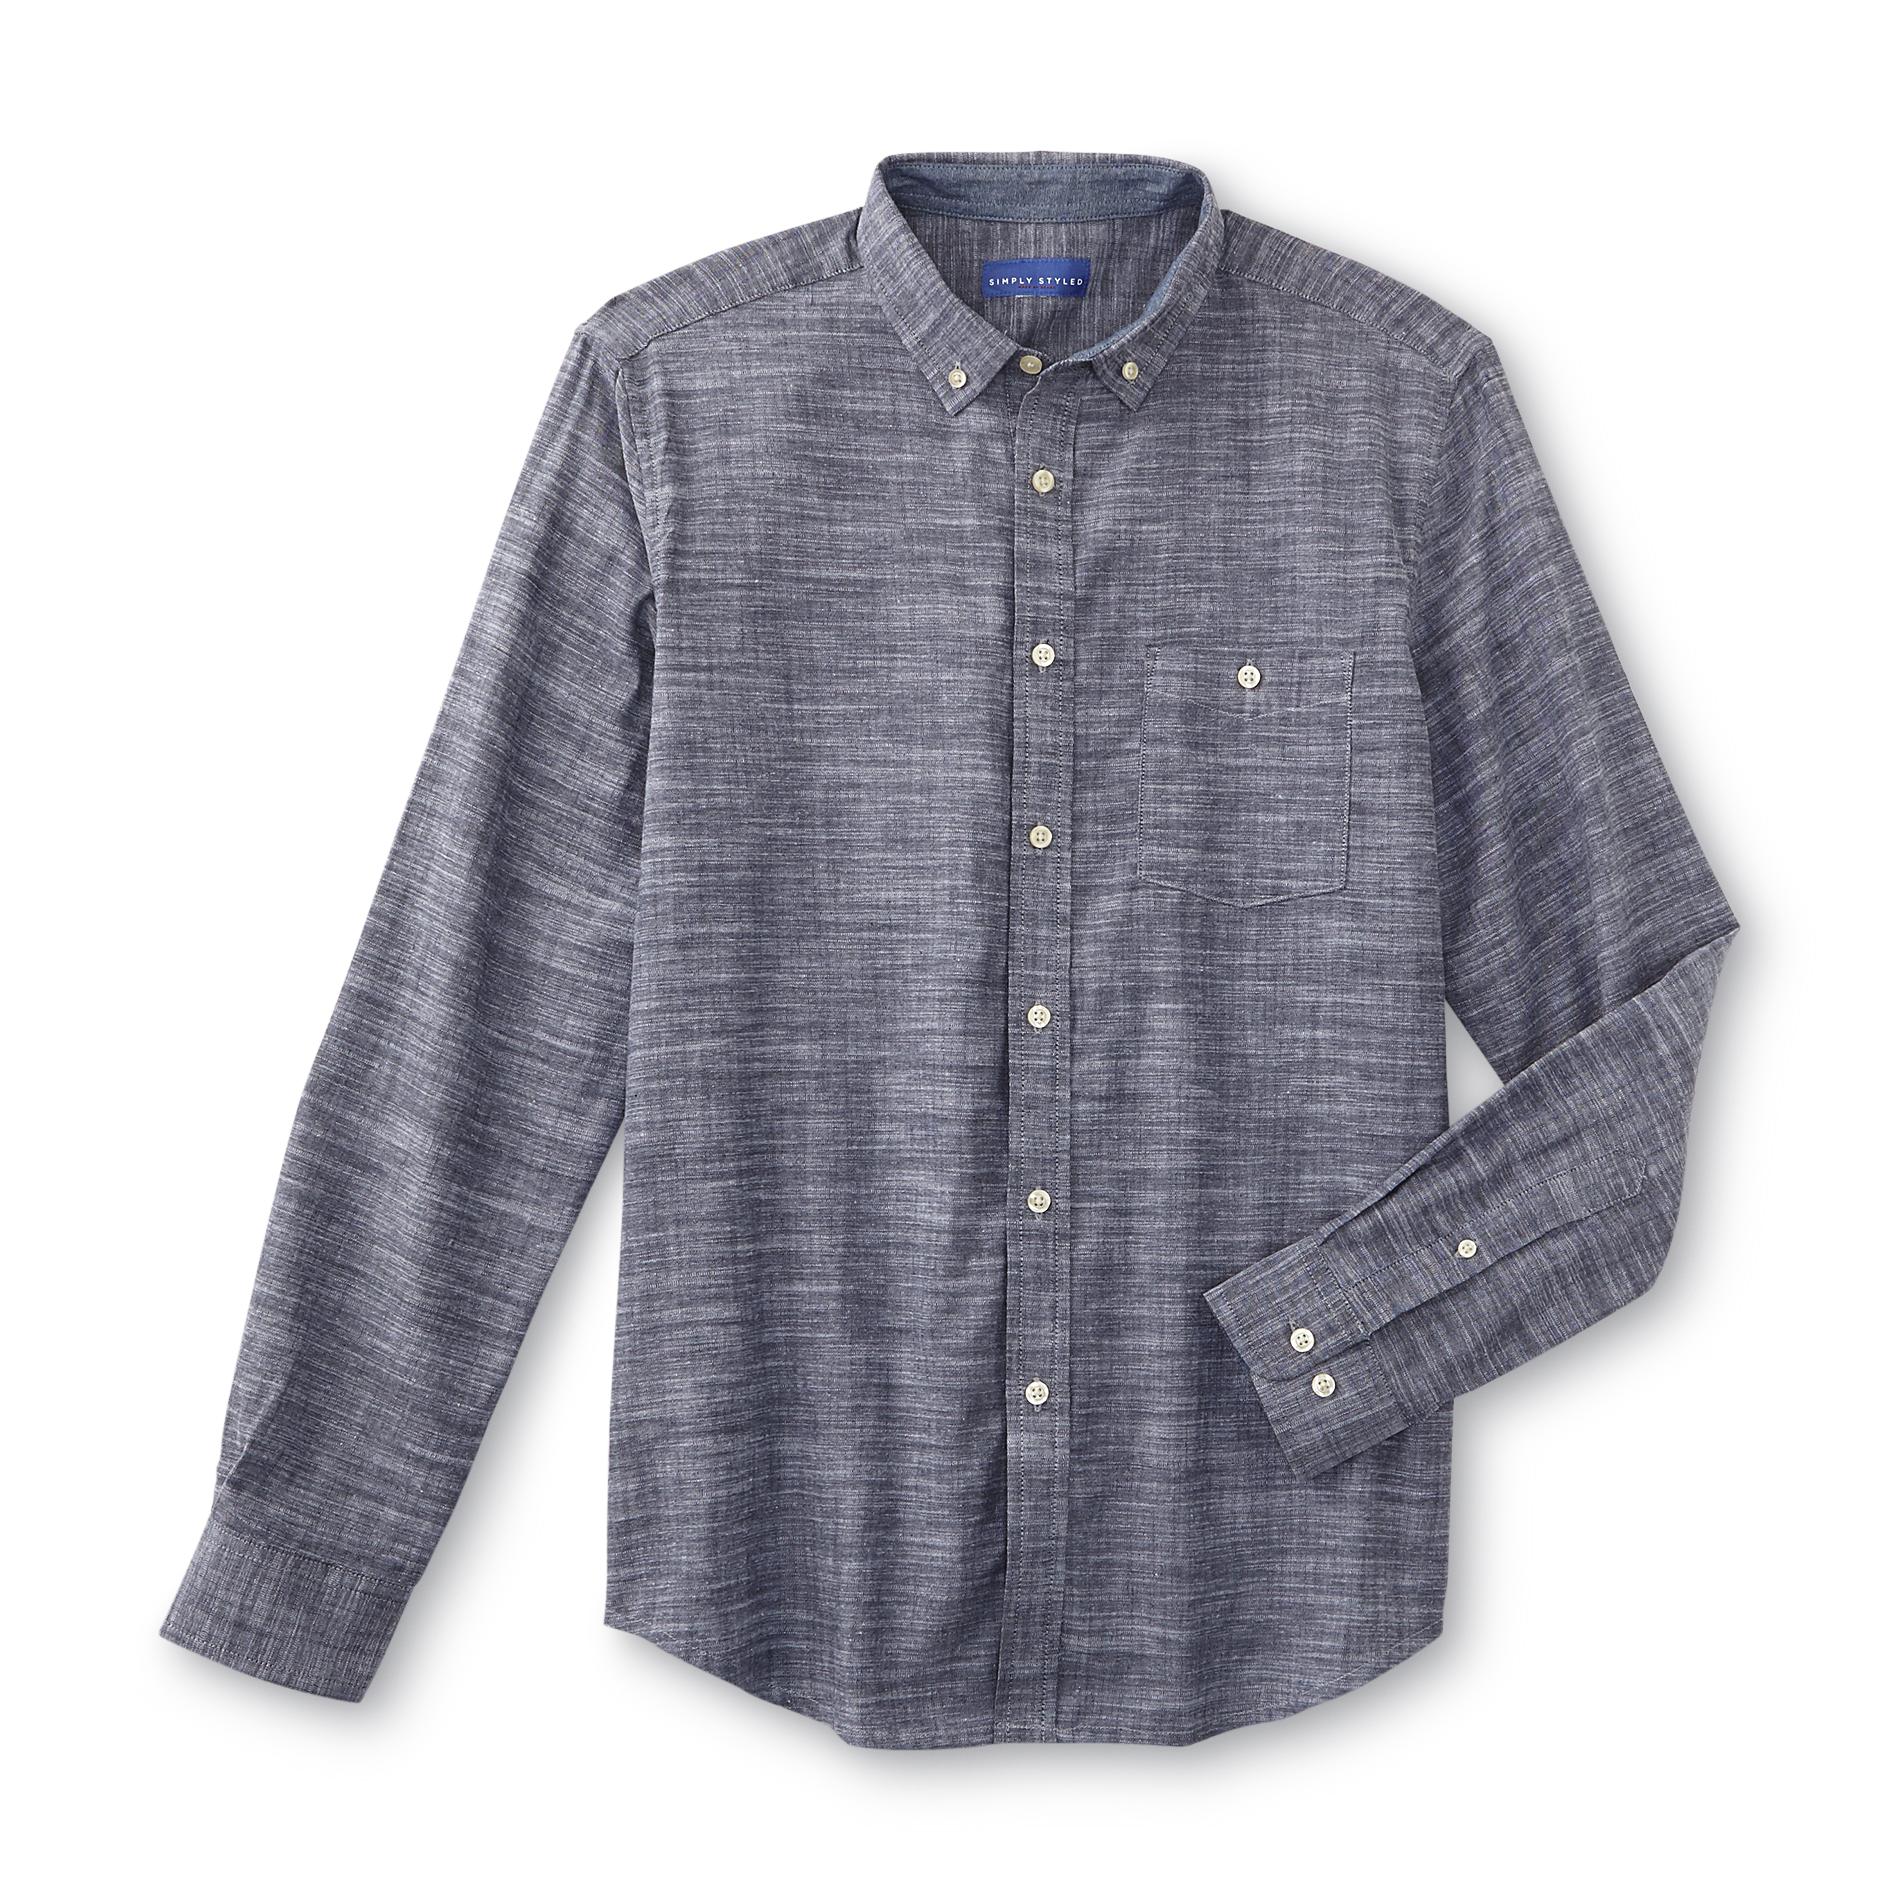 Simply Styled Men's Chambray Shirt - Space Dyed